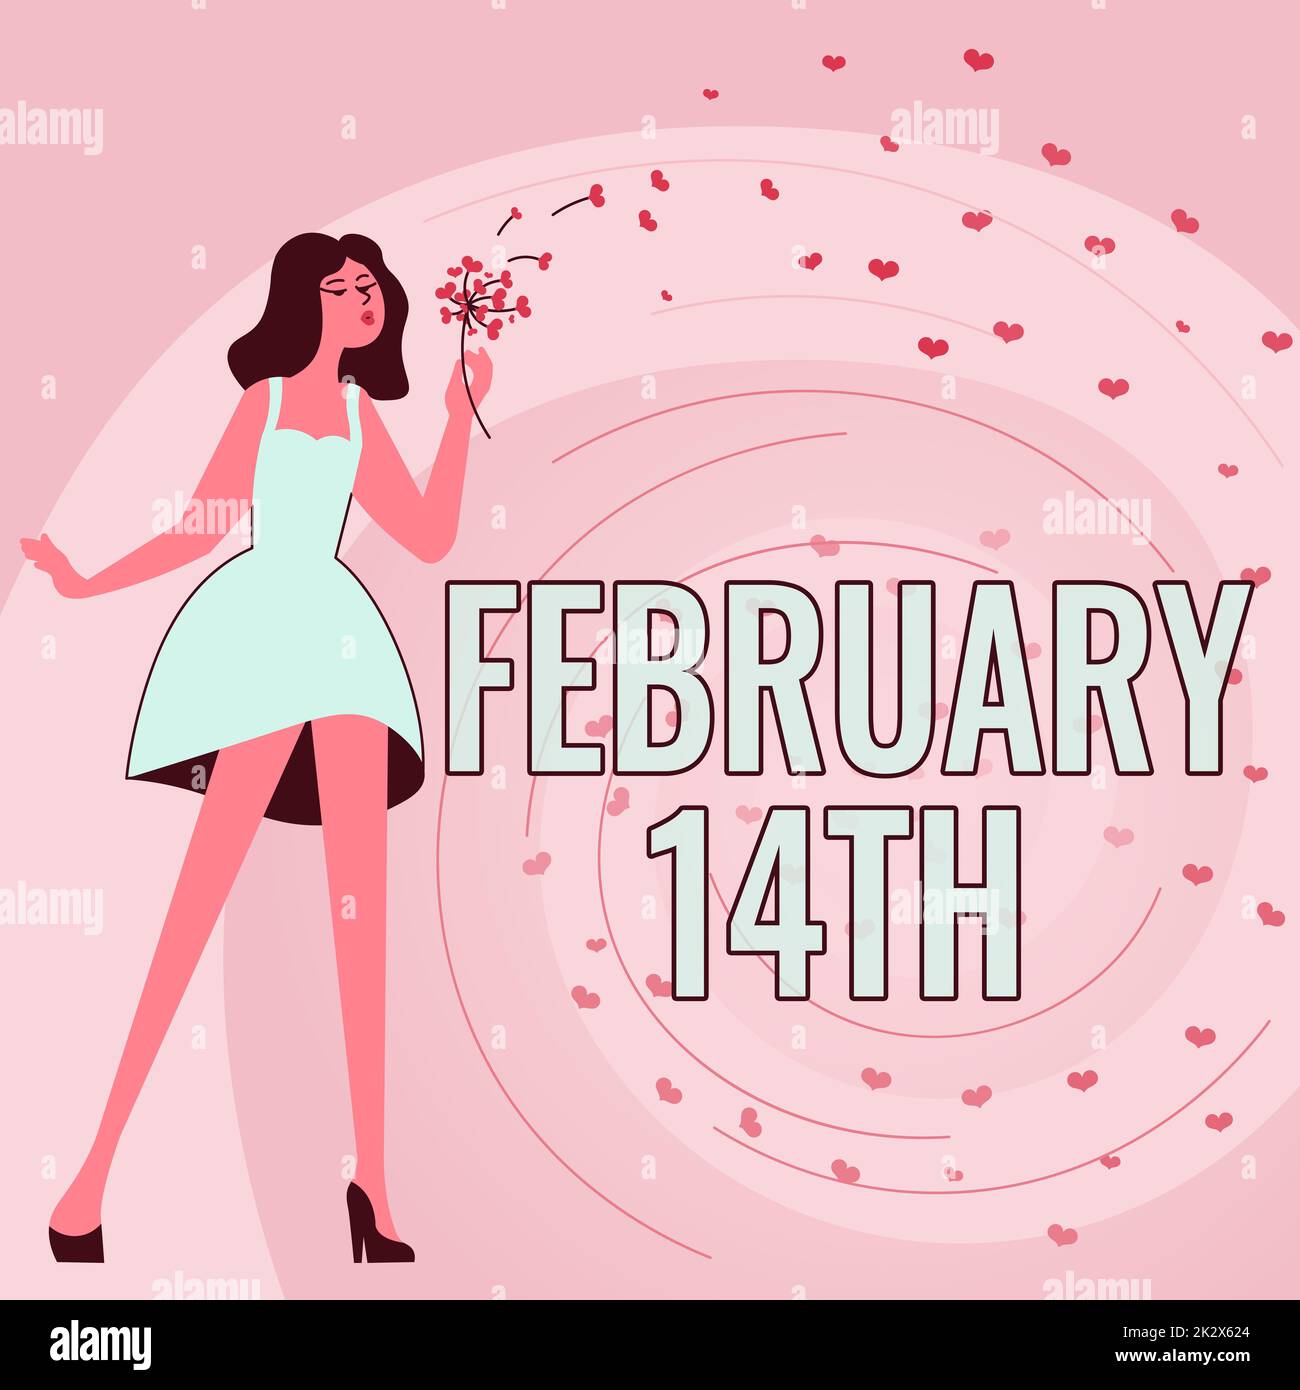 Writing displaying text FEBRUARY 14TH. Concept meaning Lovers Day named as Valentines day Woman blowing bunch of flowers displaying peaceful romantic nature. Stock Photo